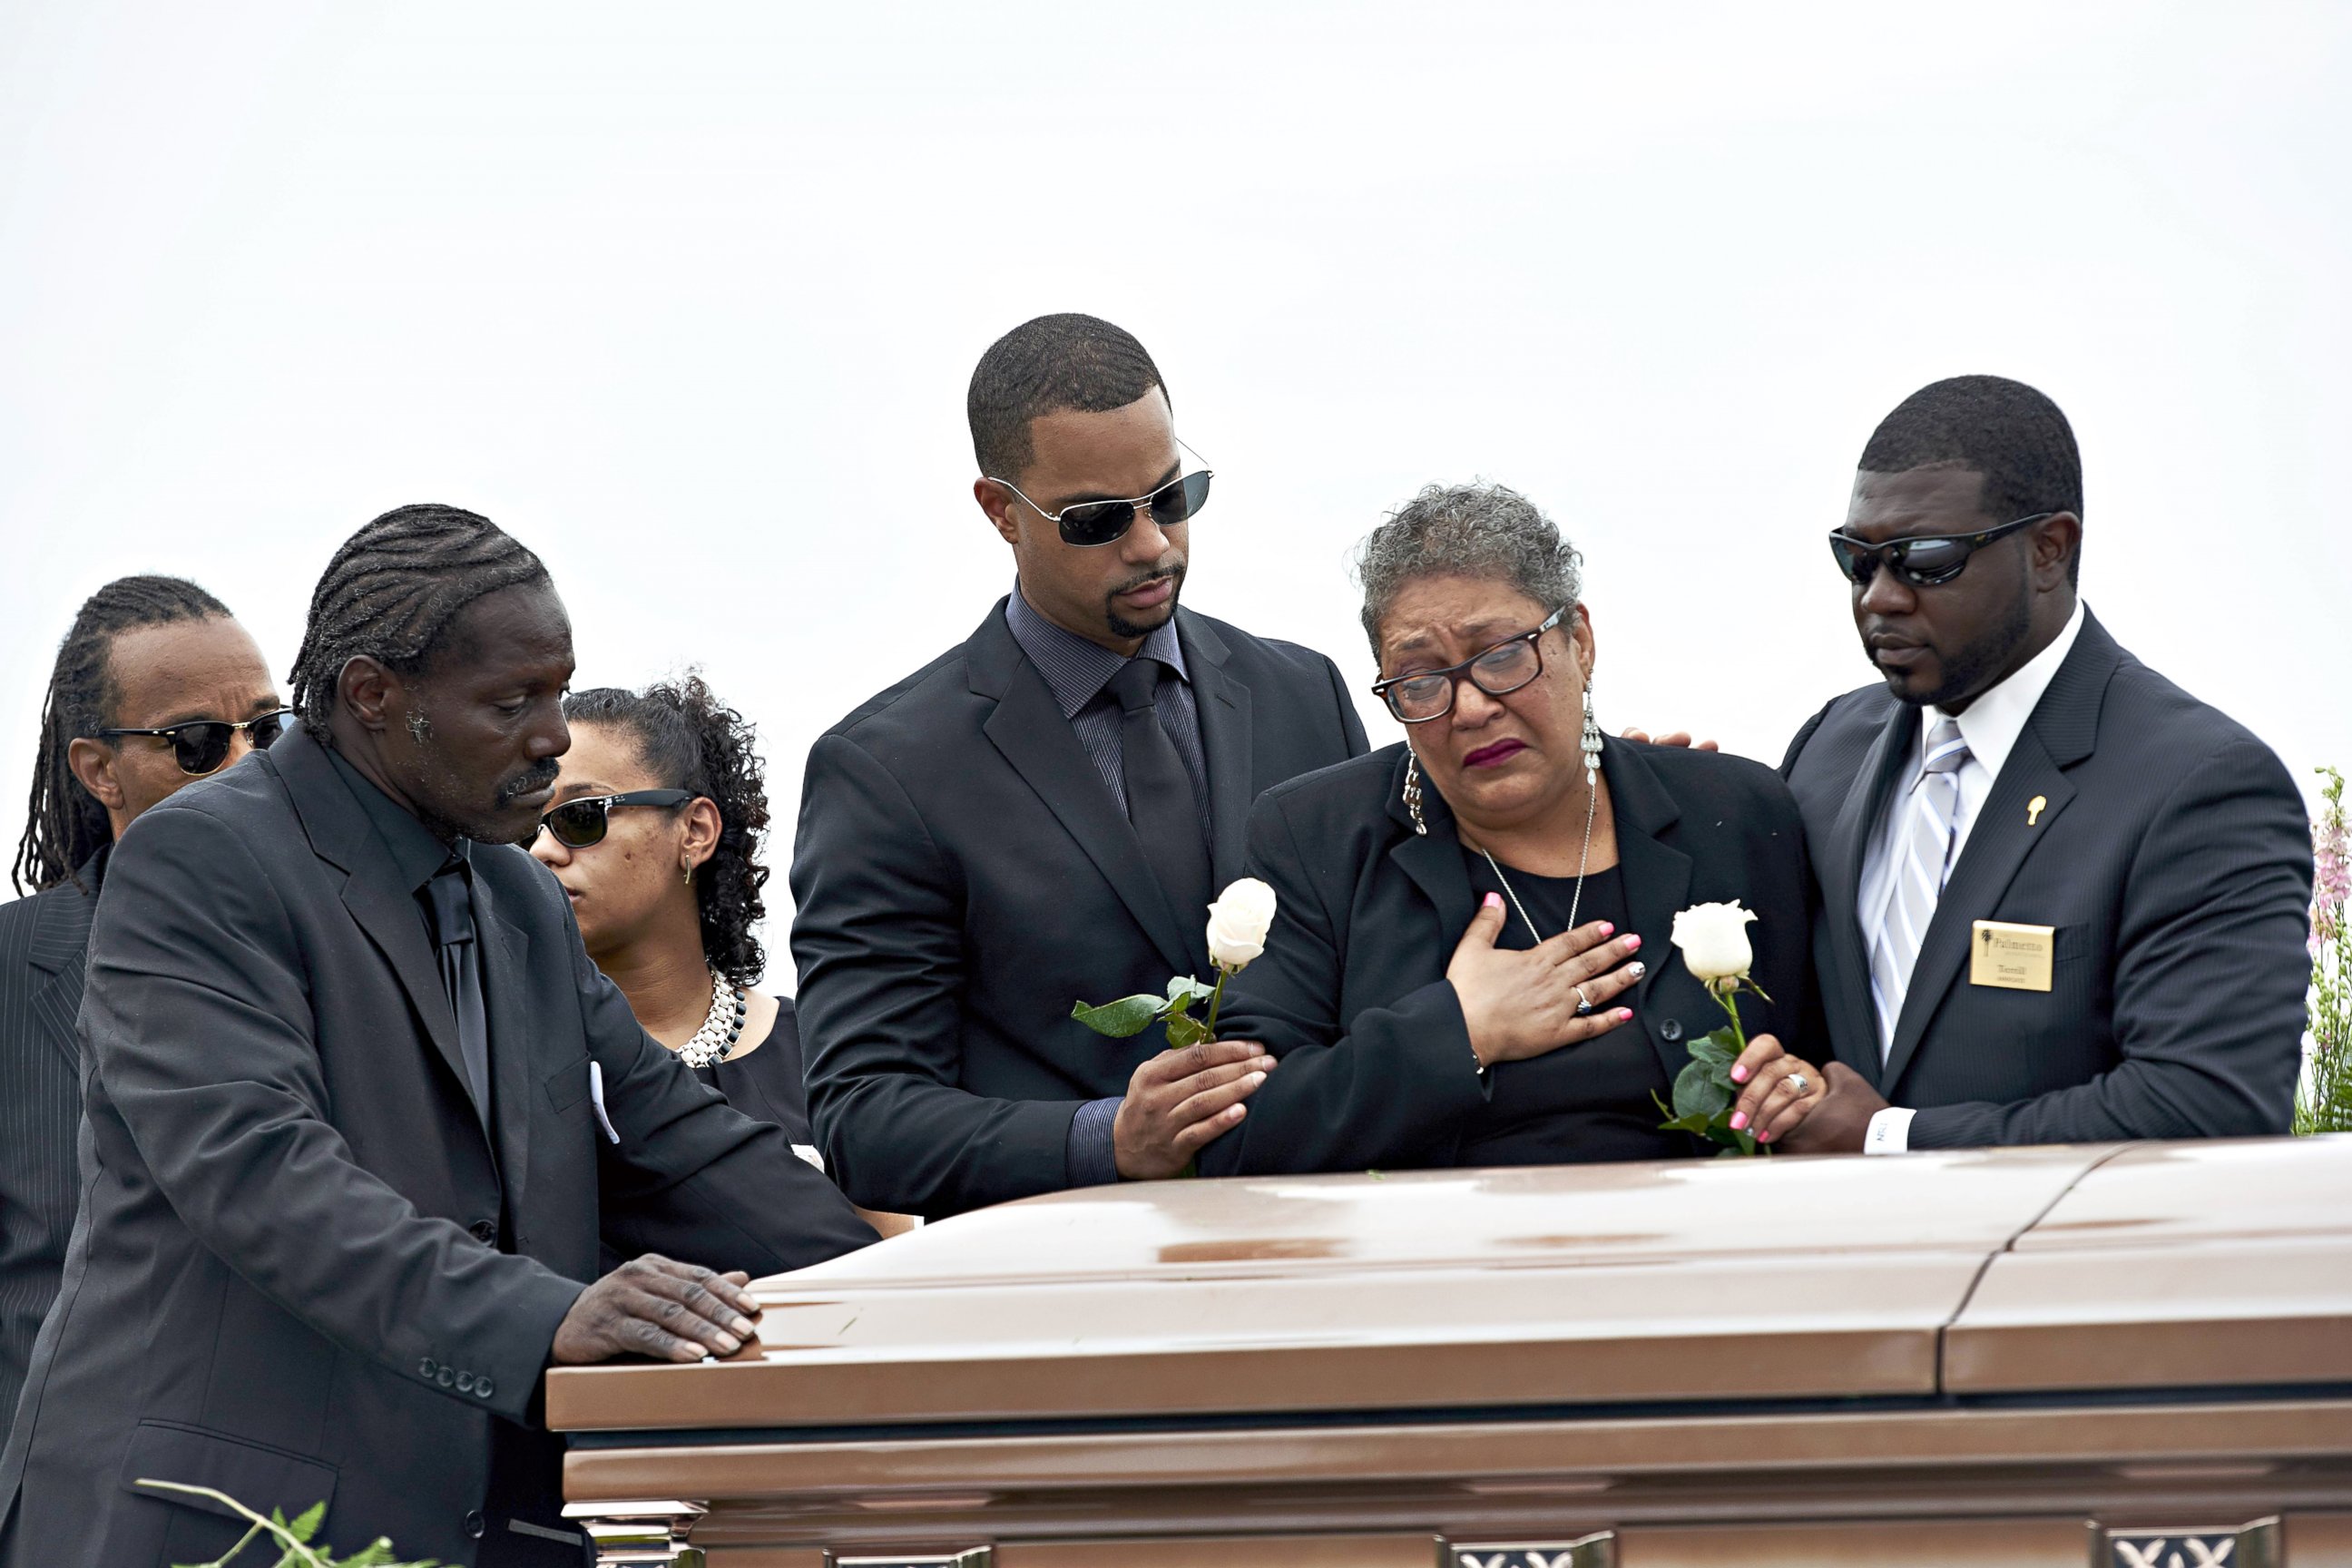 PHOTO: Sharon Risher, 2nd from right, and Gary Washington, left, pay their respects at the casket of their mother, Ethel Lance, 70, before her burial at the AME Church cemetery, June 25, 2015, in North Charleston, South Carolina. 